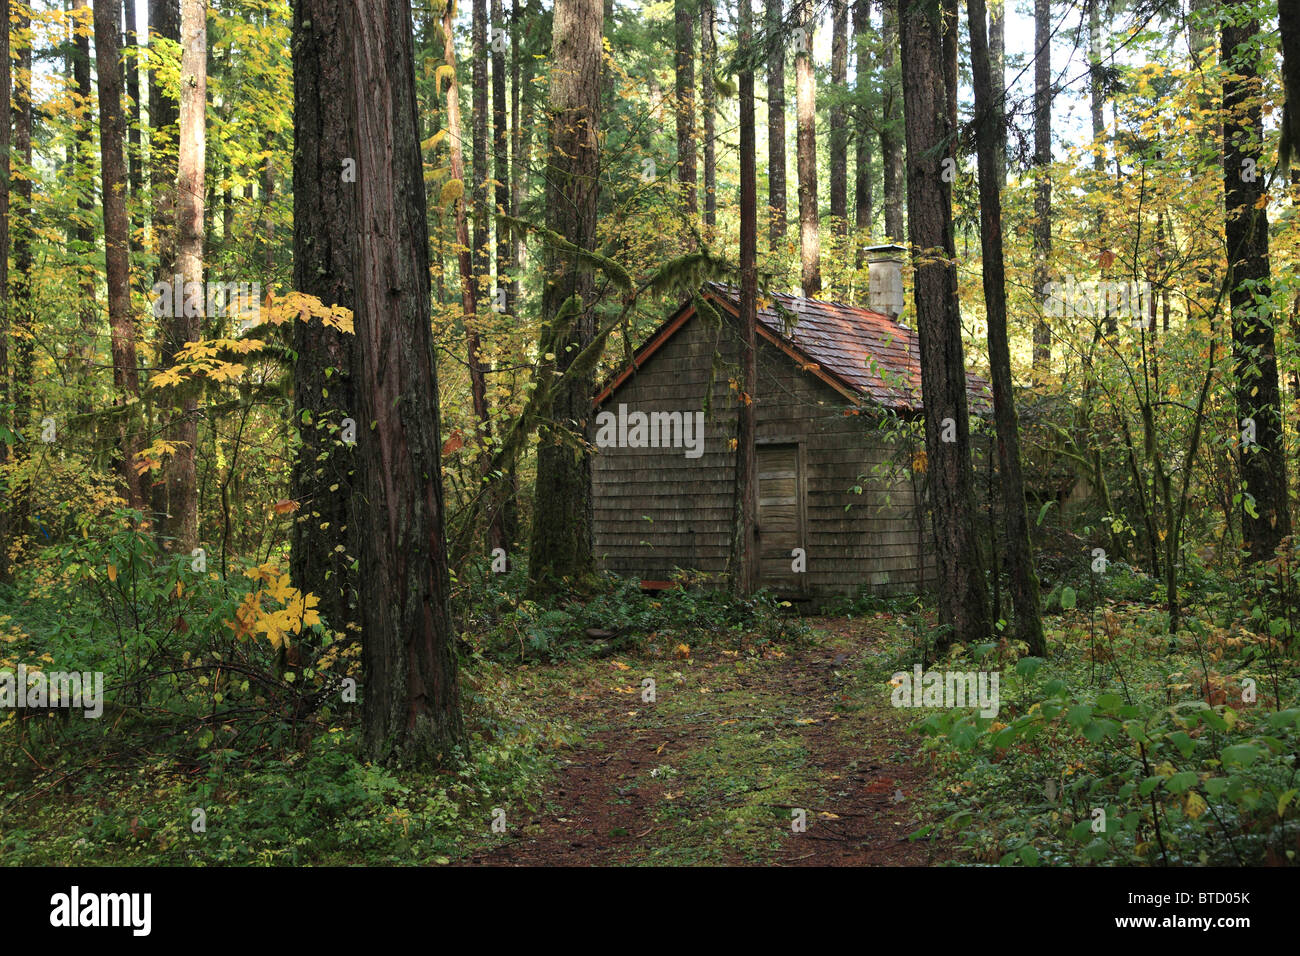 An old cabin in the woods Stock Photo: 32247647 - Alamy